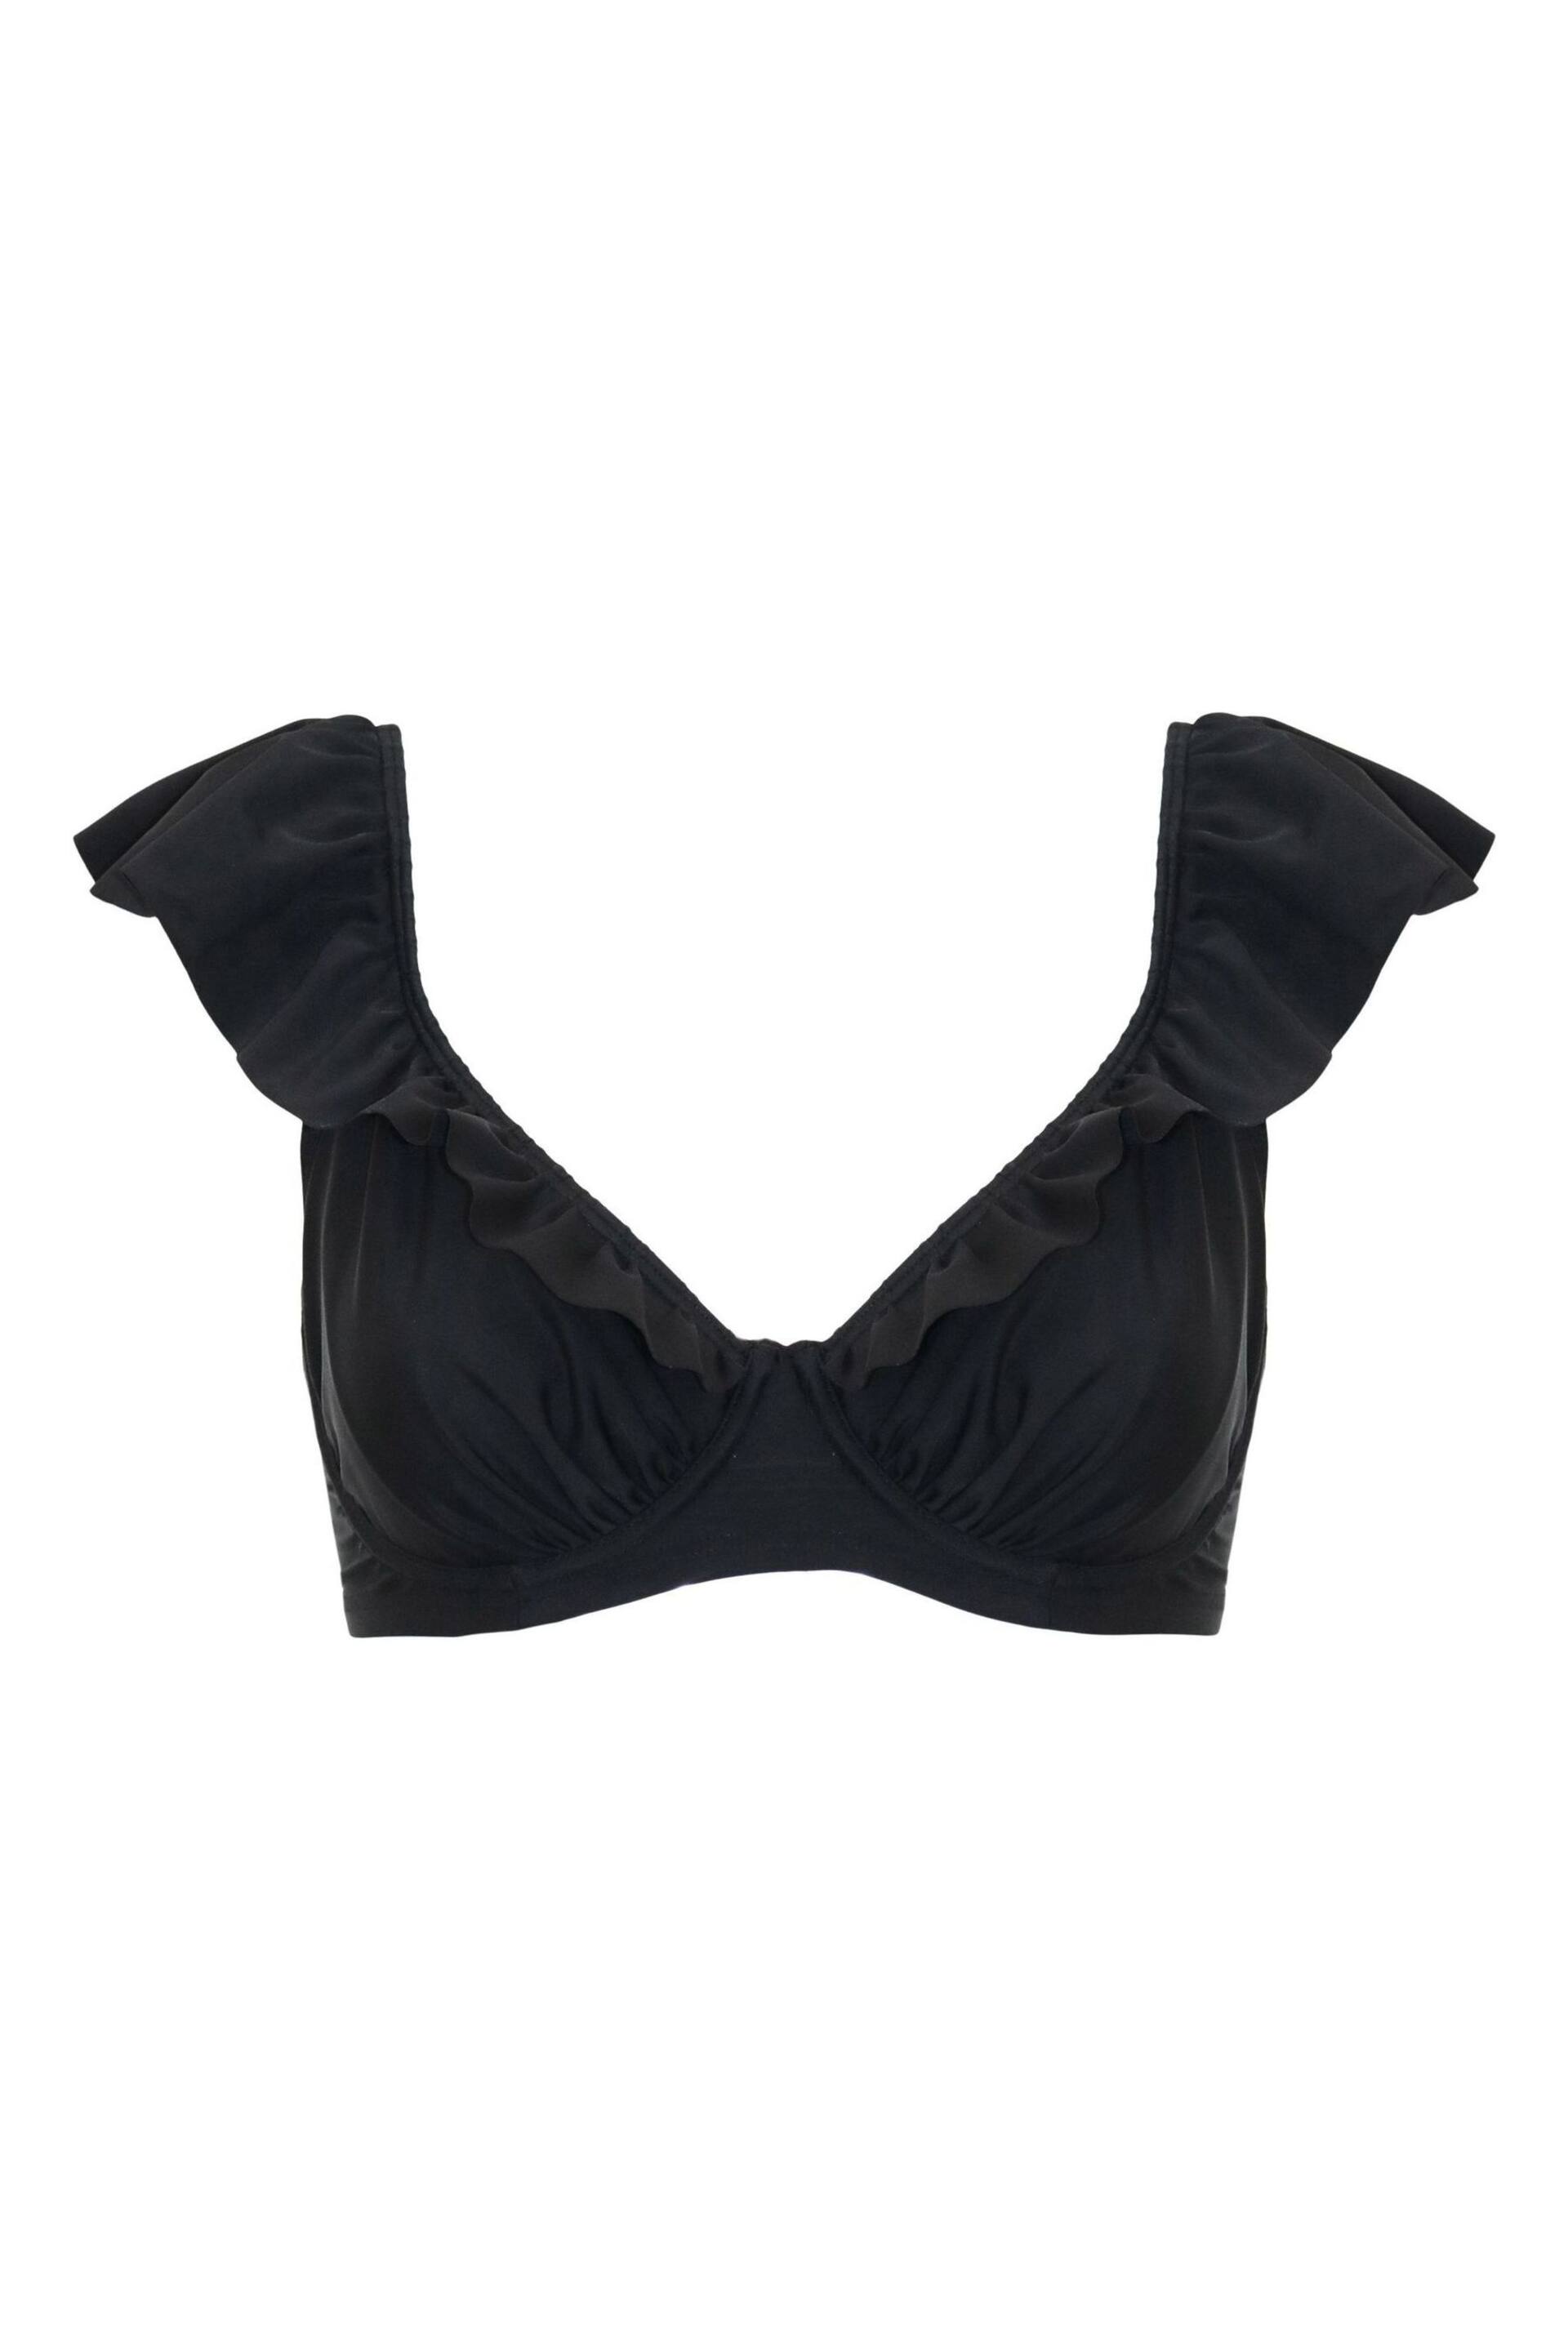 Pour Moi Black Bermuda Underwired Non Padded Frill Top - Image 4 of 4